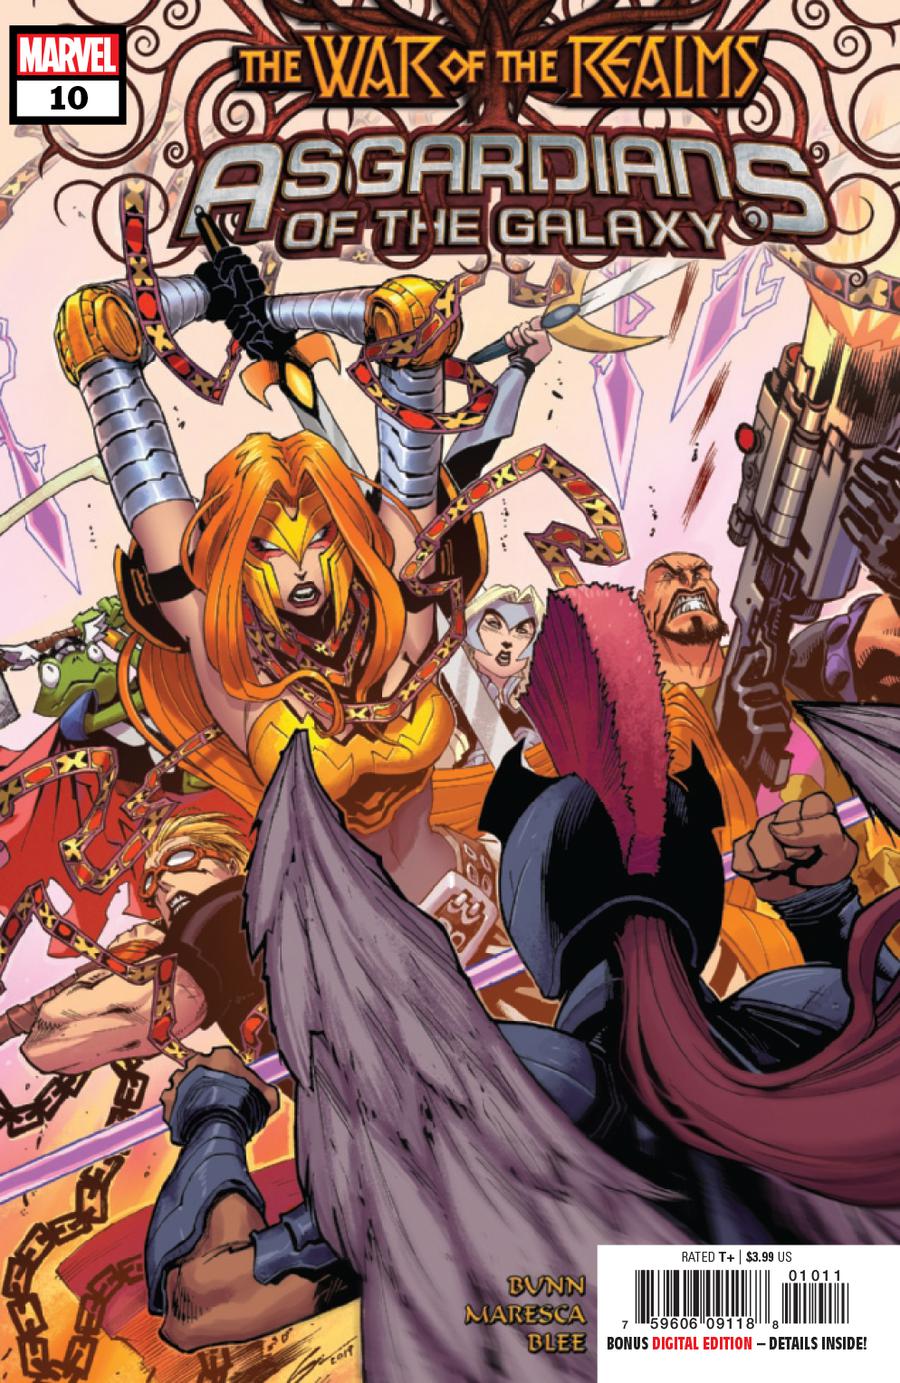 Asgardians Of The Galaxy #10 (War Of The Realms Tie-In)